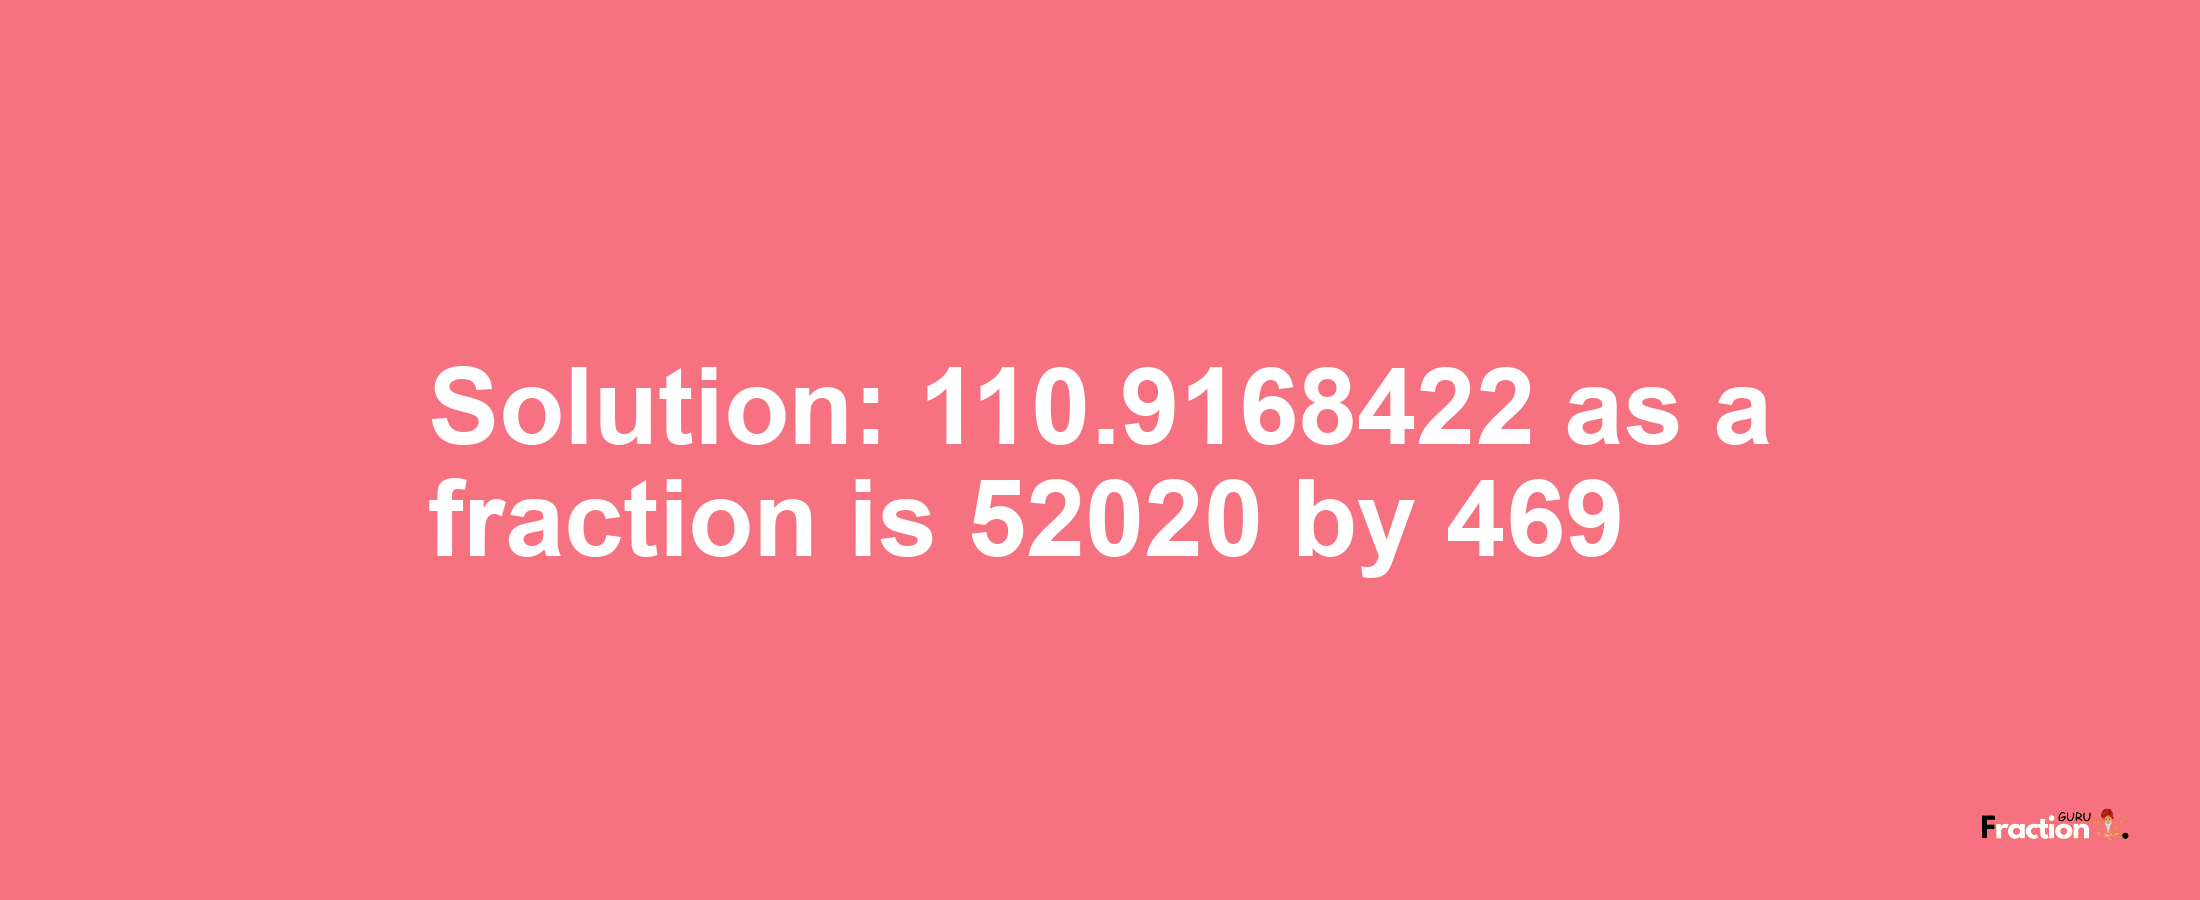 Solution:110.9168422 as a fraction is 52020/469